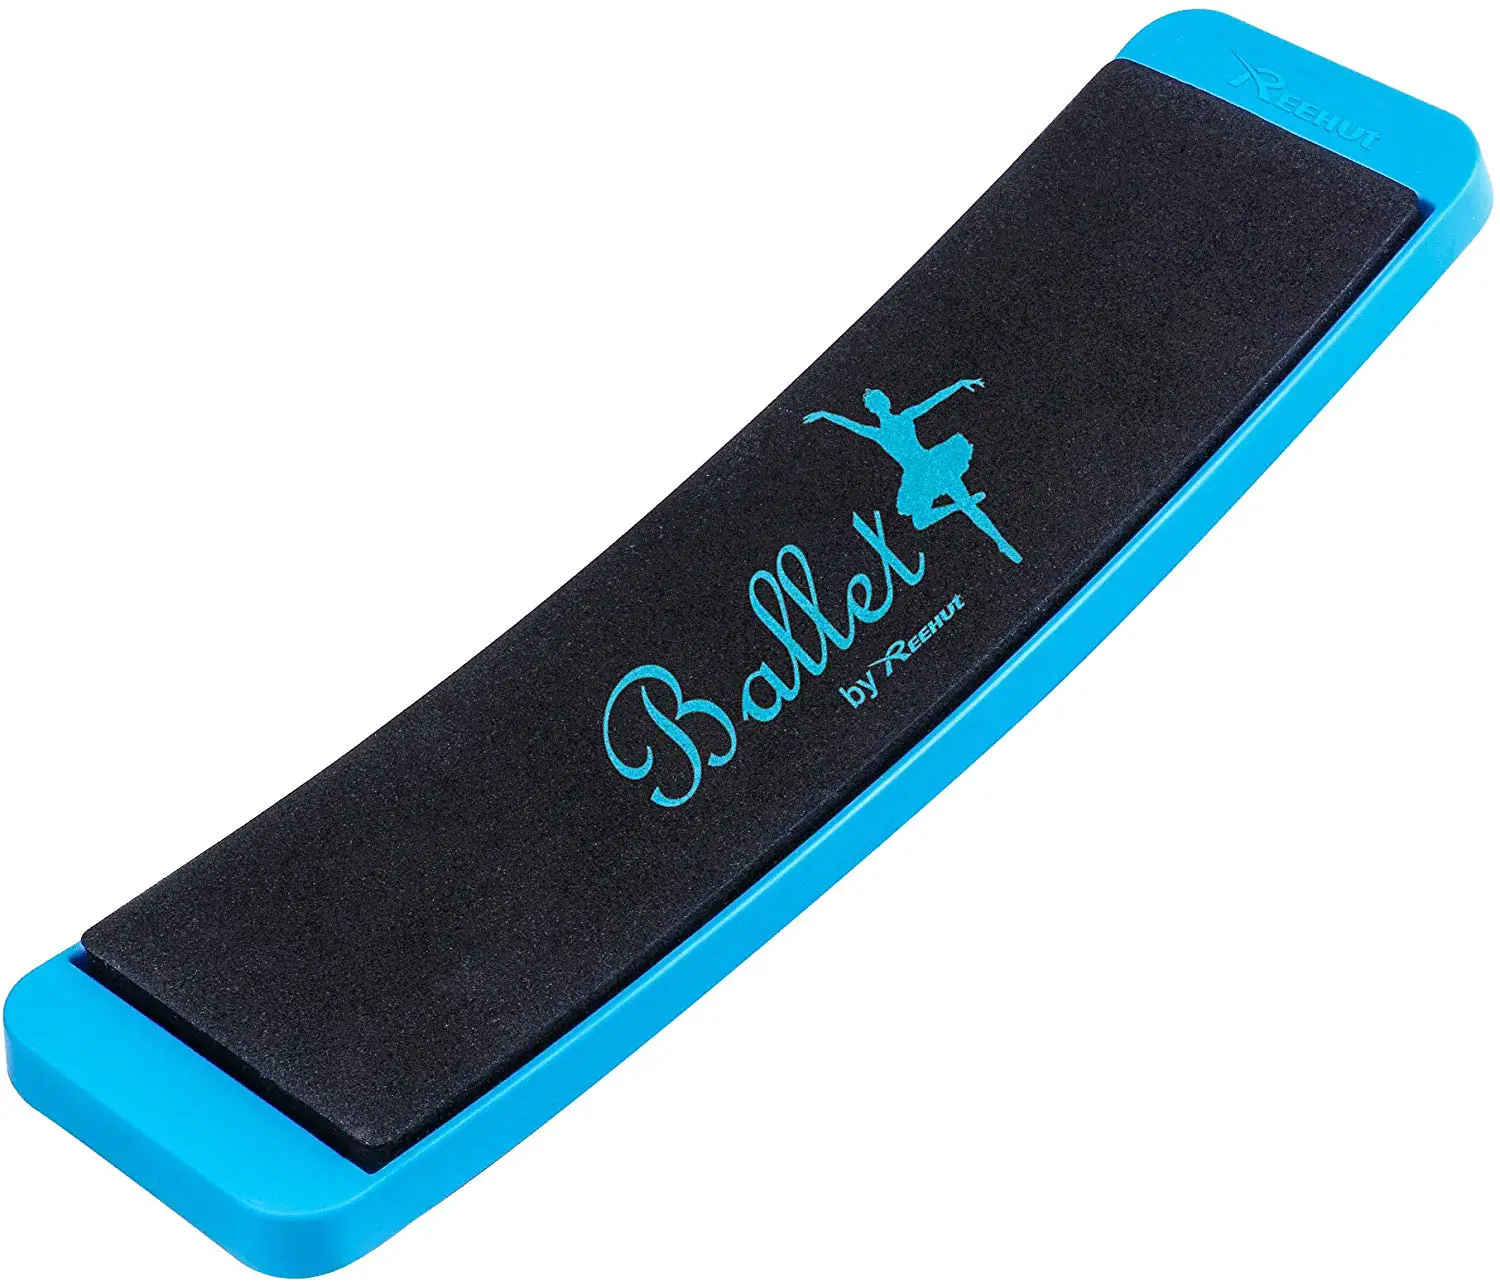 Dance Accessory and Ballet Equipment Keen so Ballet Dance Turn and Spin Board,Turning Board For Dancers Portable,Ballet Turning Disc,Turns and Balance